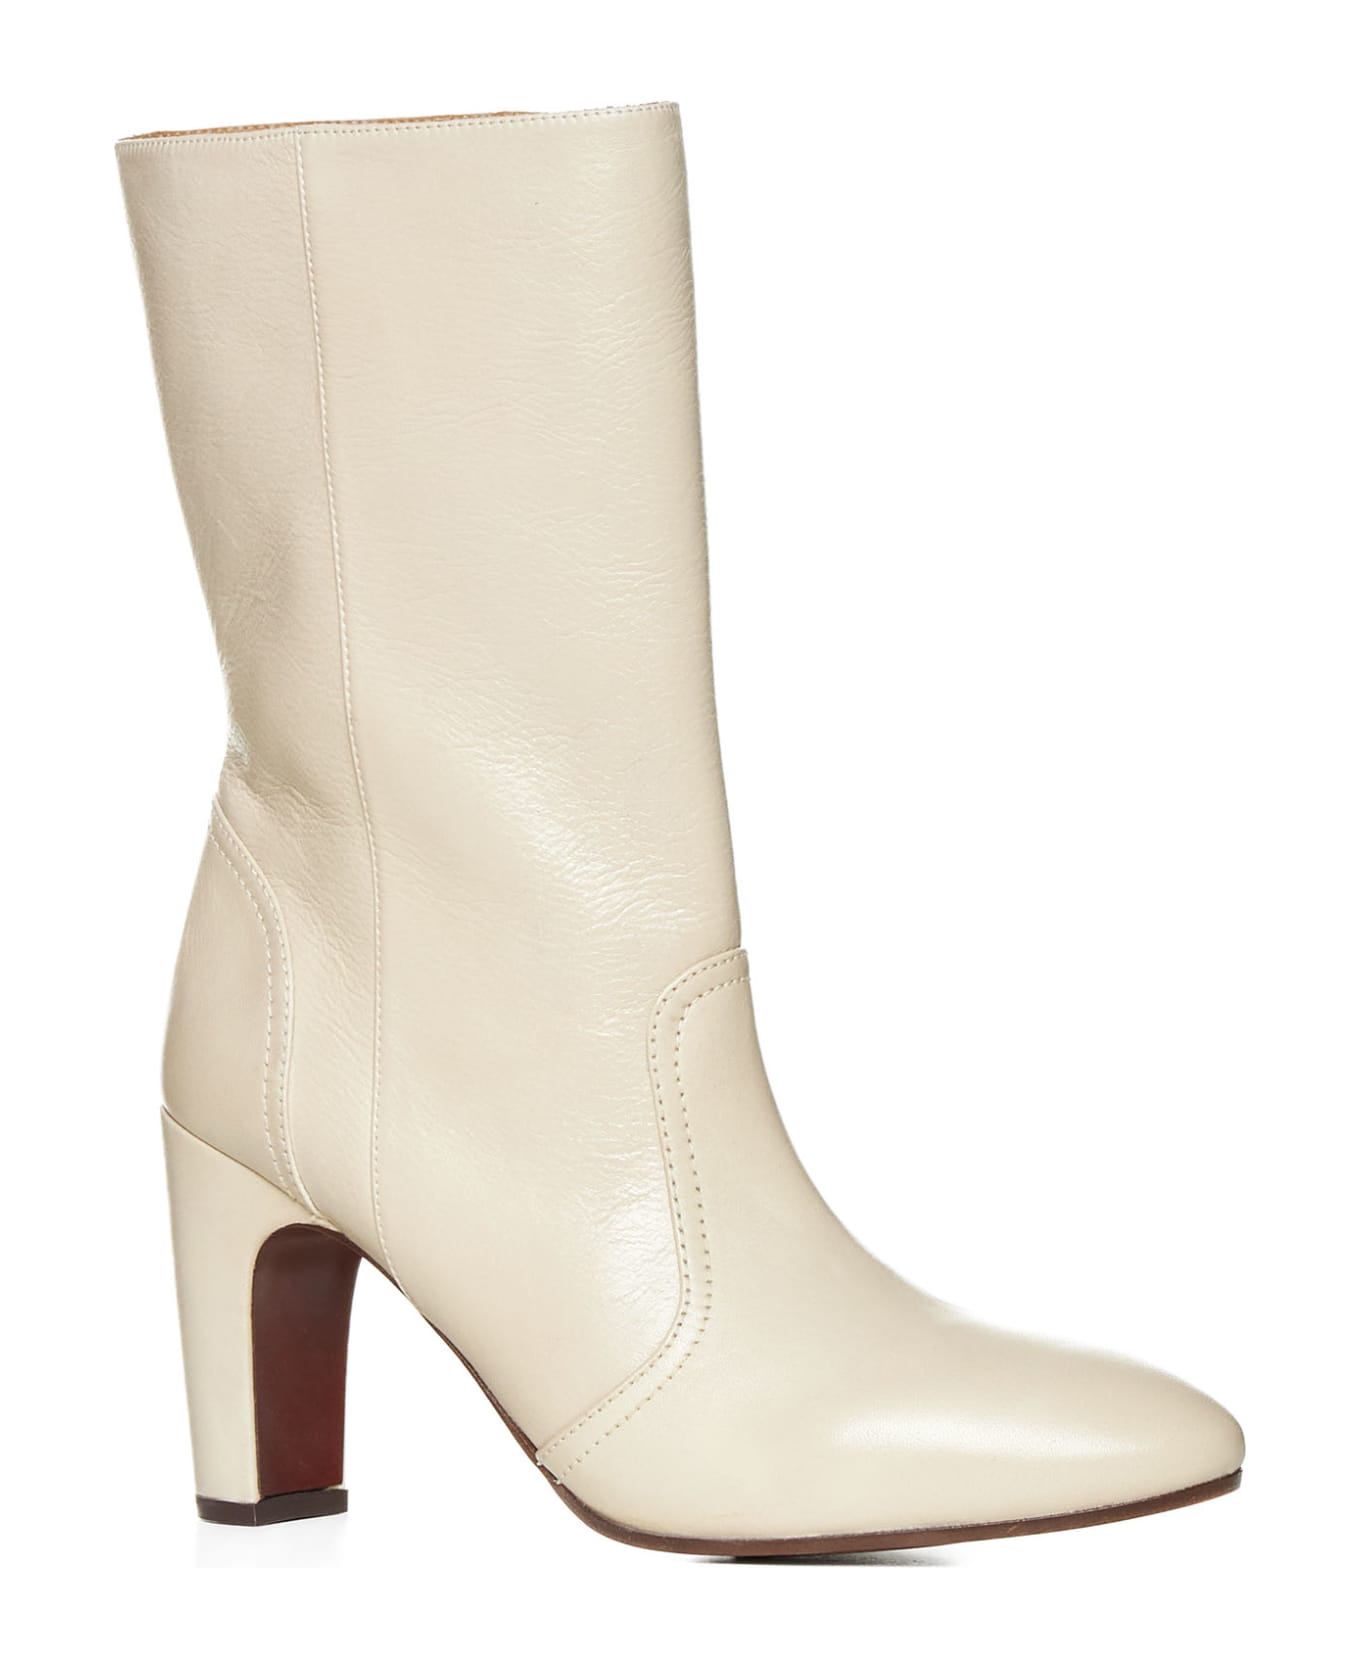 Chie Mihara Boots - Leche